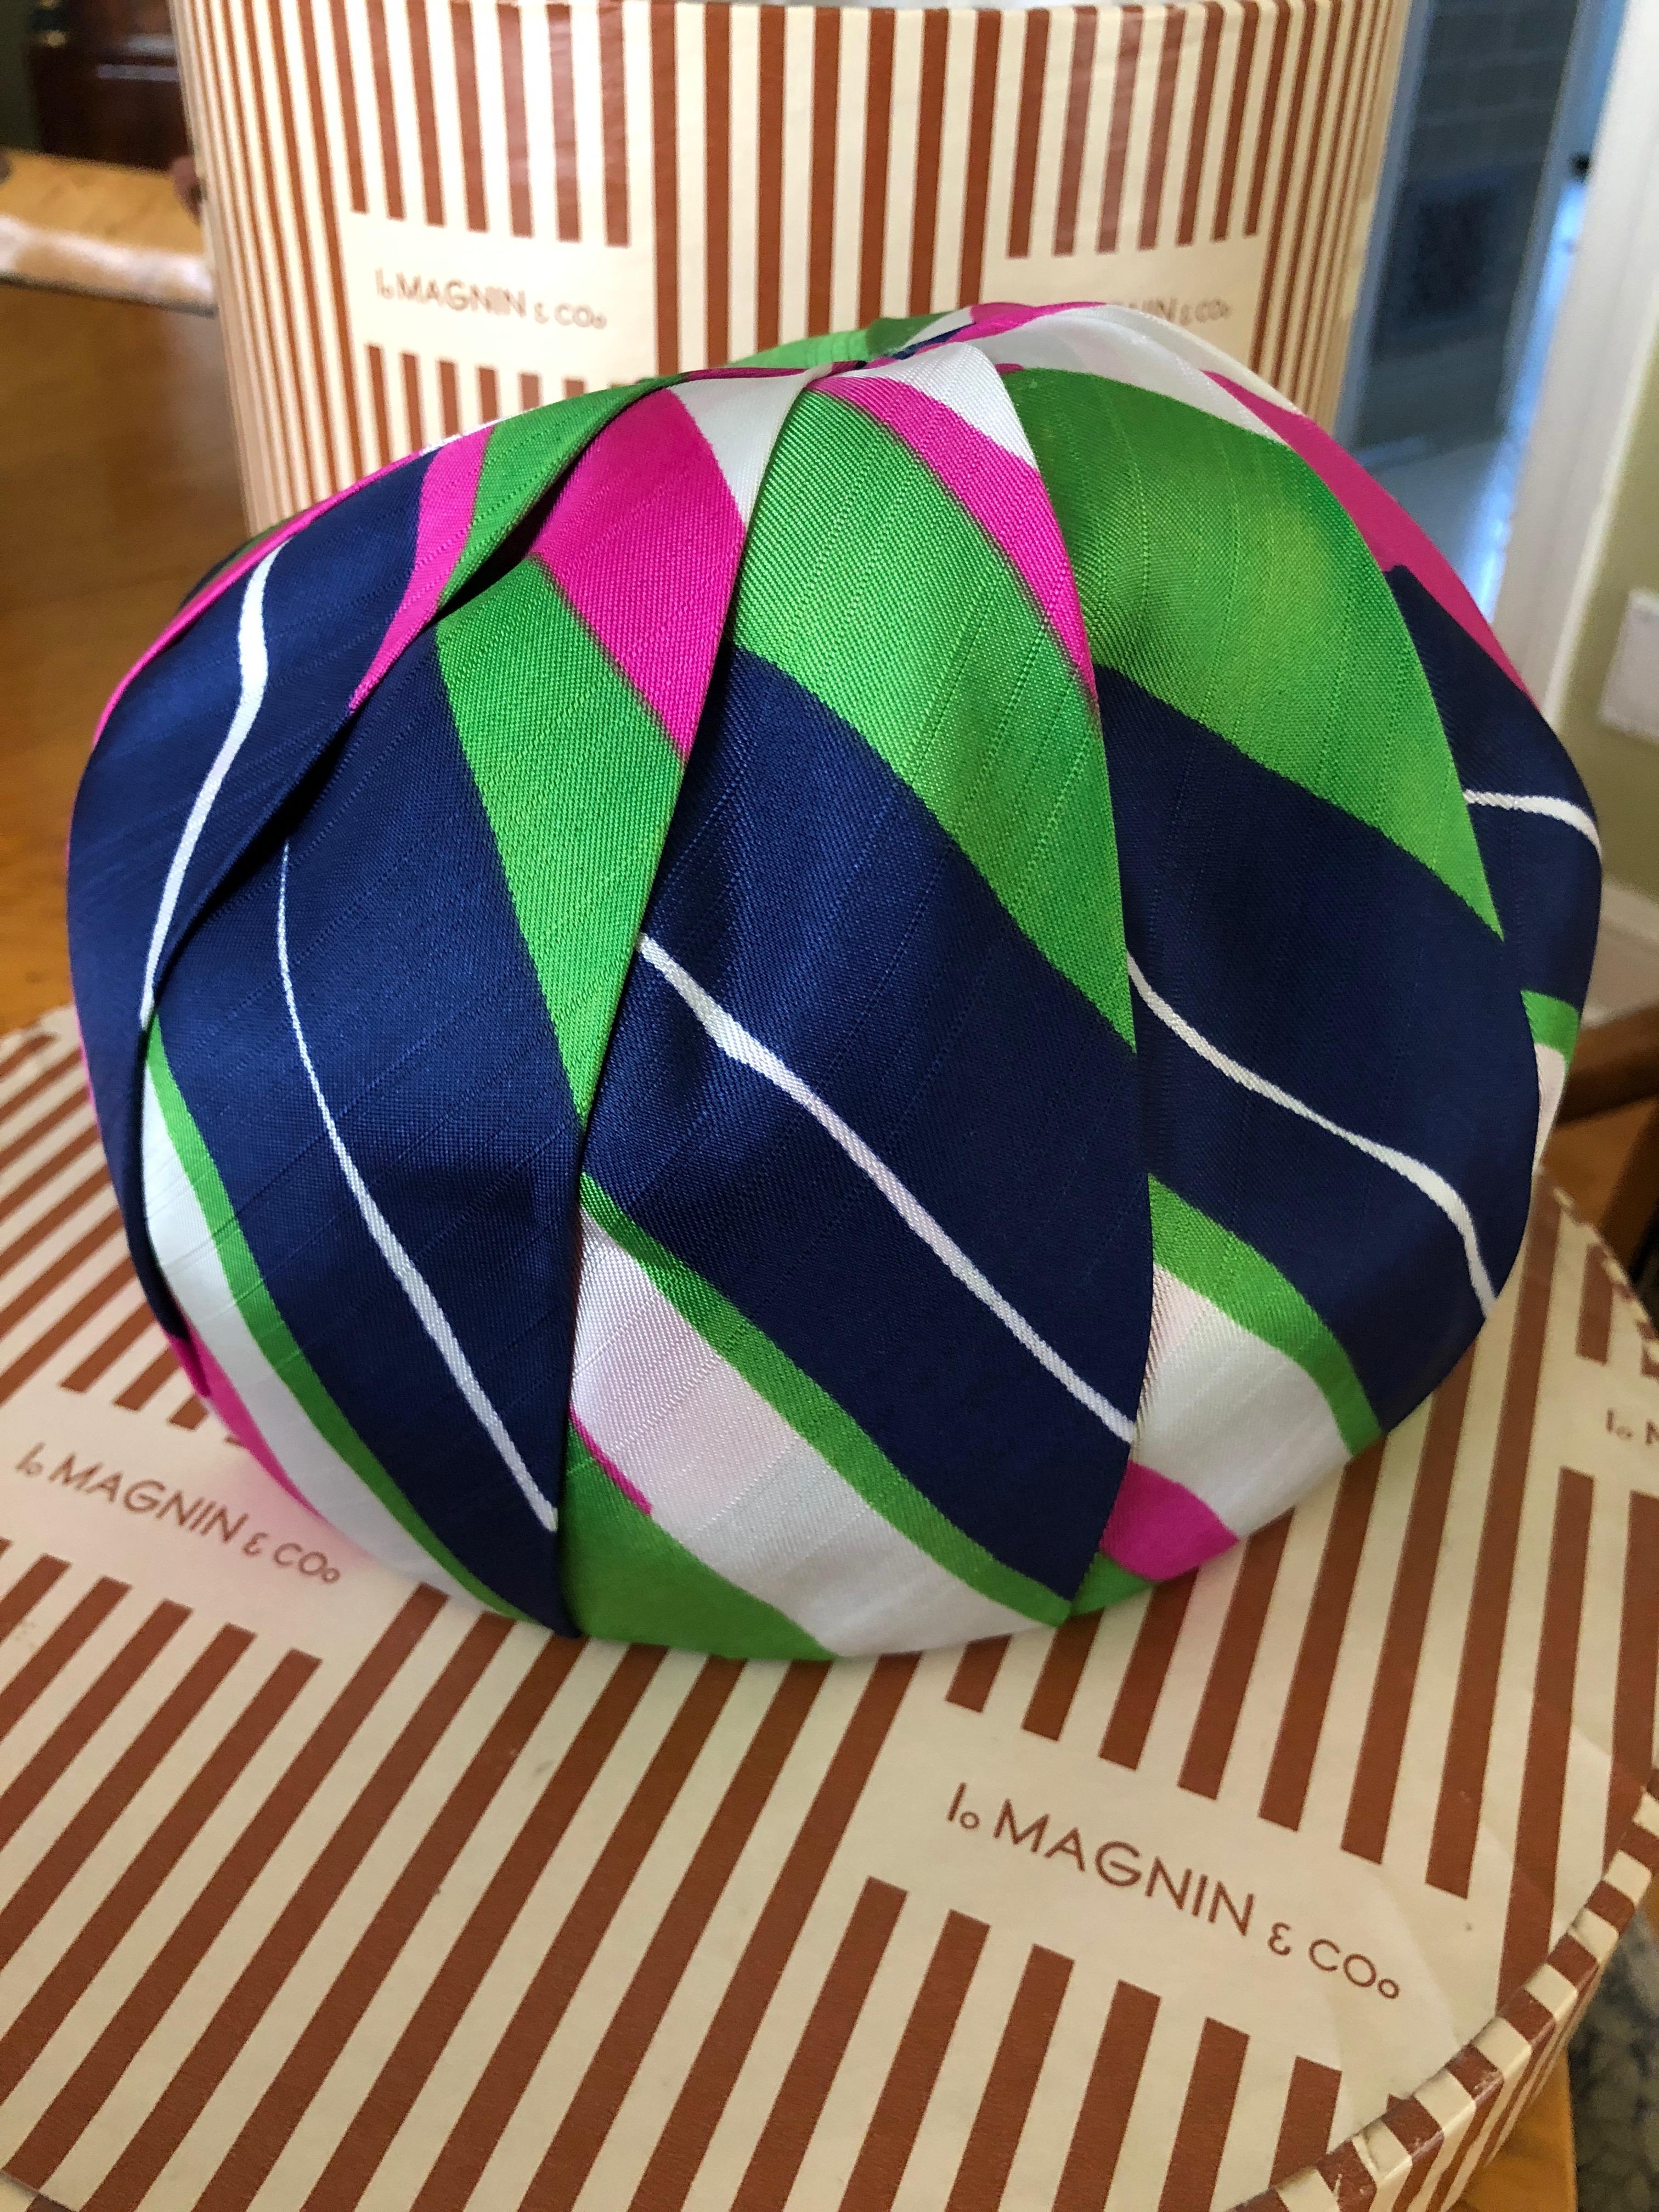 I. Magnin 1960 Deadstock Tall Silk Pillbox Hat w Tags In New Condition For Sale In Cloverdale, CA